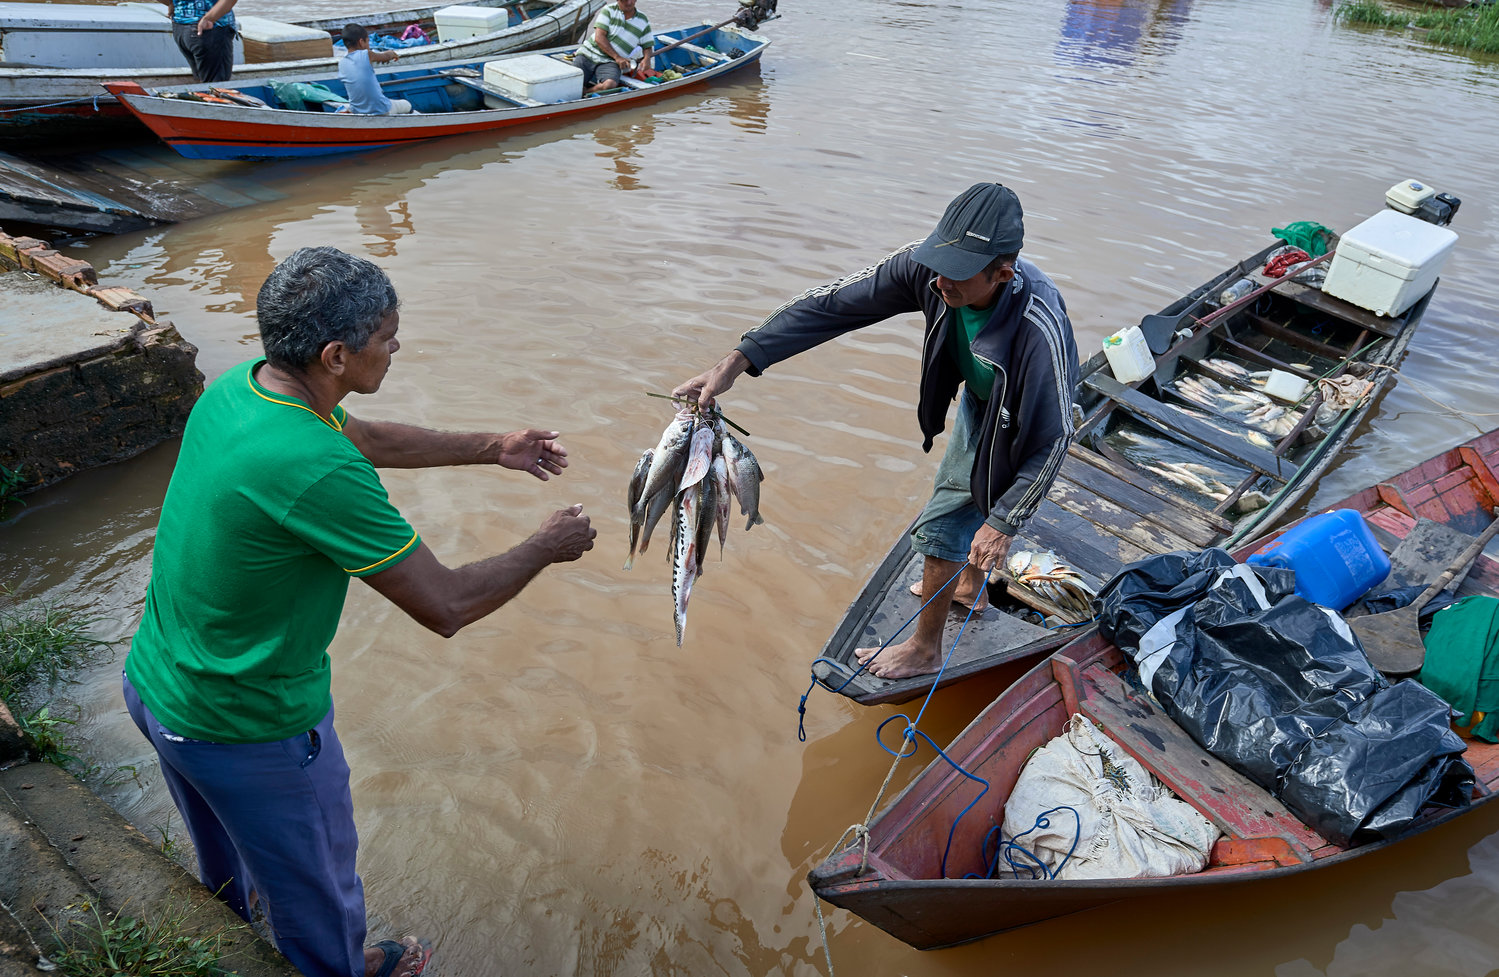 A fisher sells part of his catch at the dock in Santarem, a city alongside the Amazon River in Brazil's northern Para state. The Vatican released Pope Francis' postsynodal apostolic exhortation, "Querida Amazonia" (Beloved Amazonia), Feb. 12, 2020.